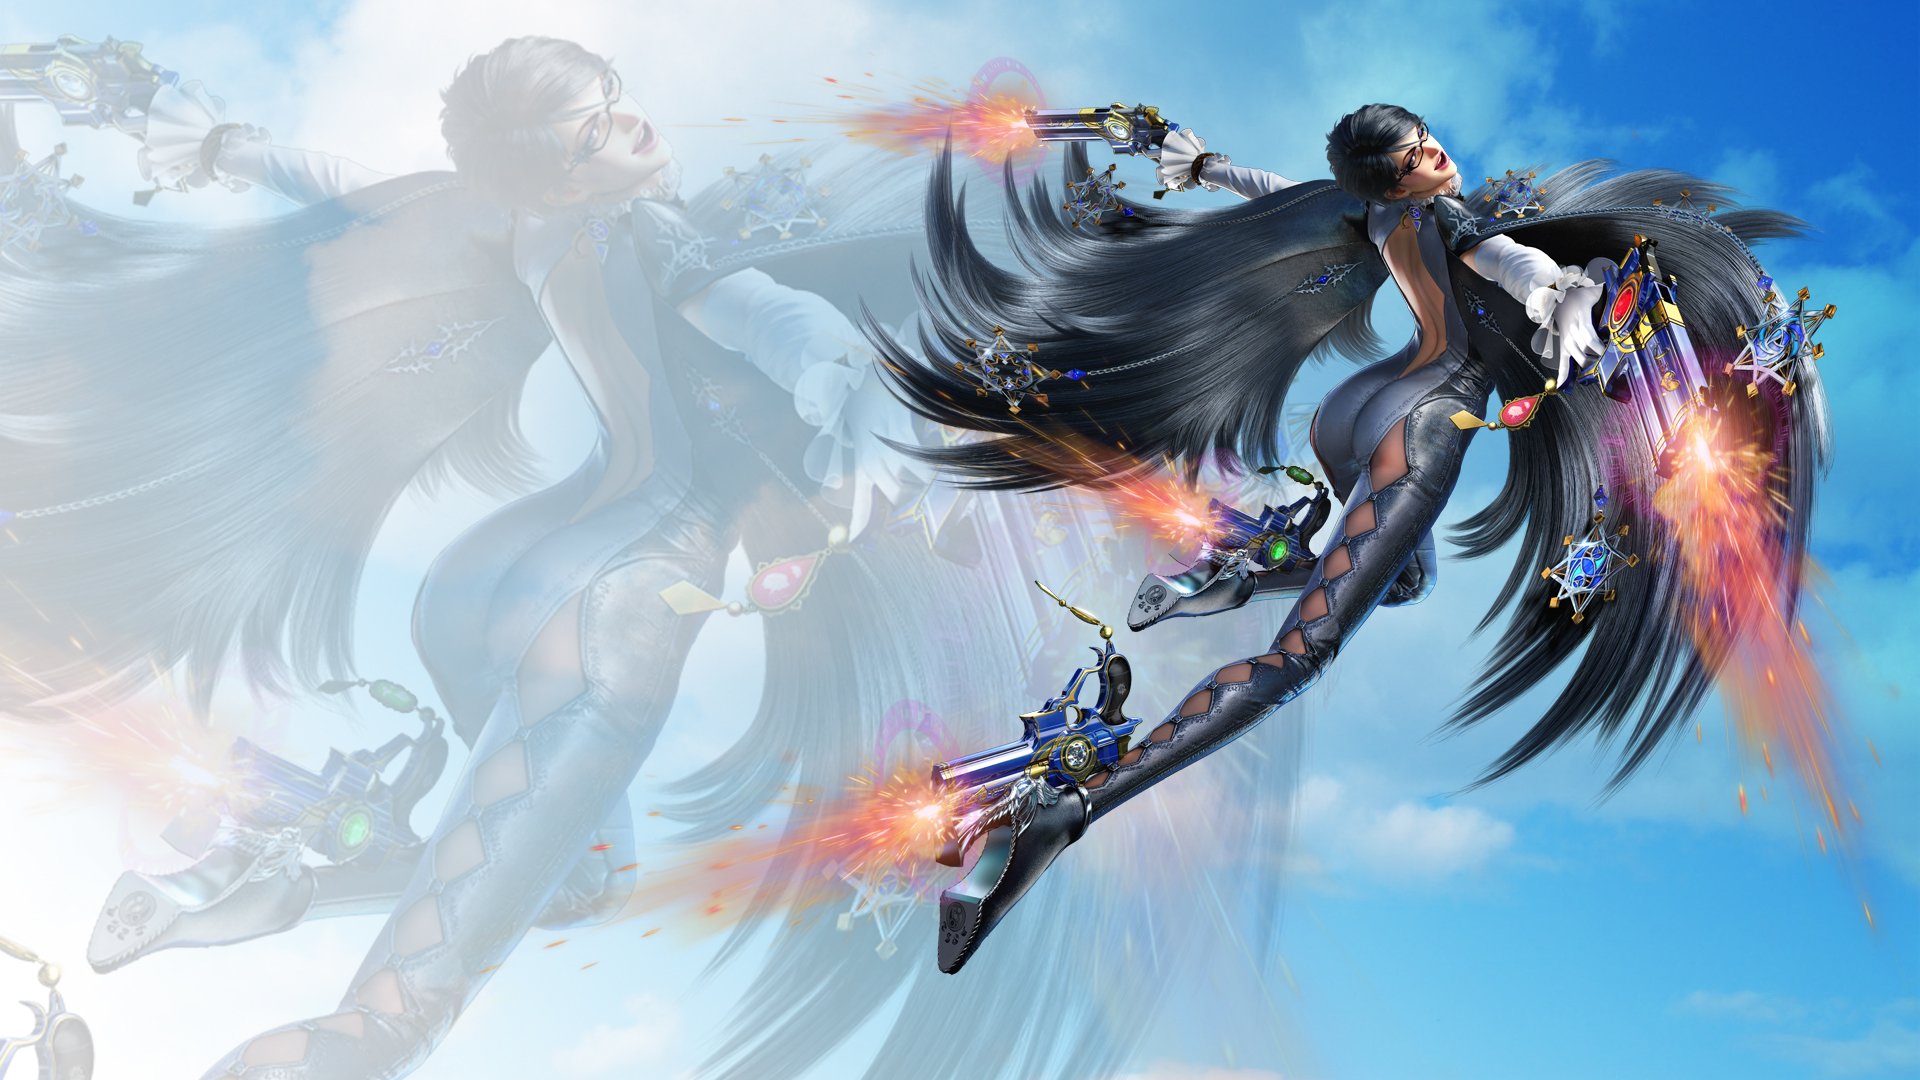 13 Bayonetta 2 Hd Wallpapers Background Images Wallpaper Abyss Images, Photos, Reviews